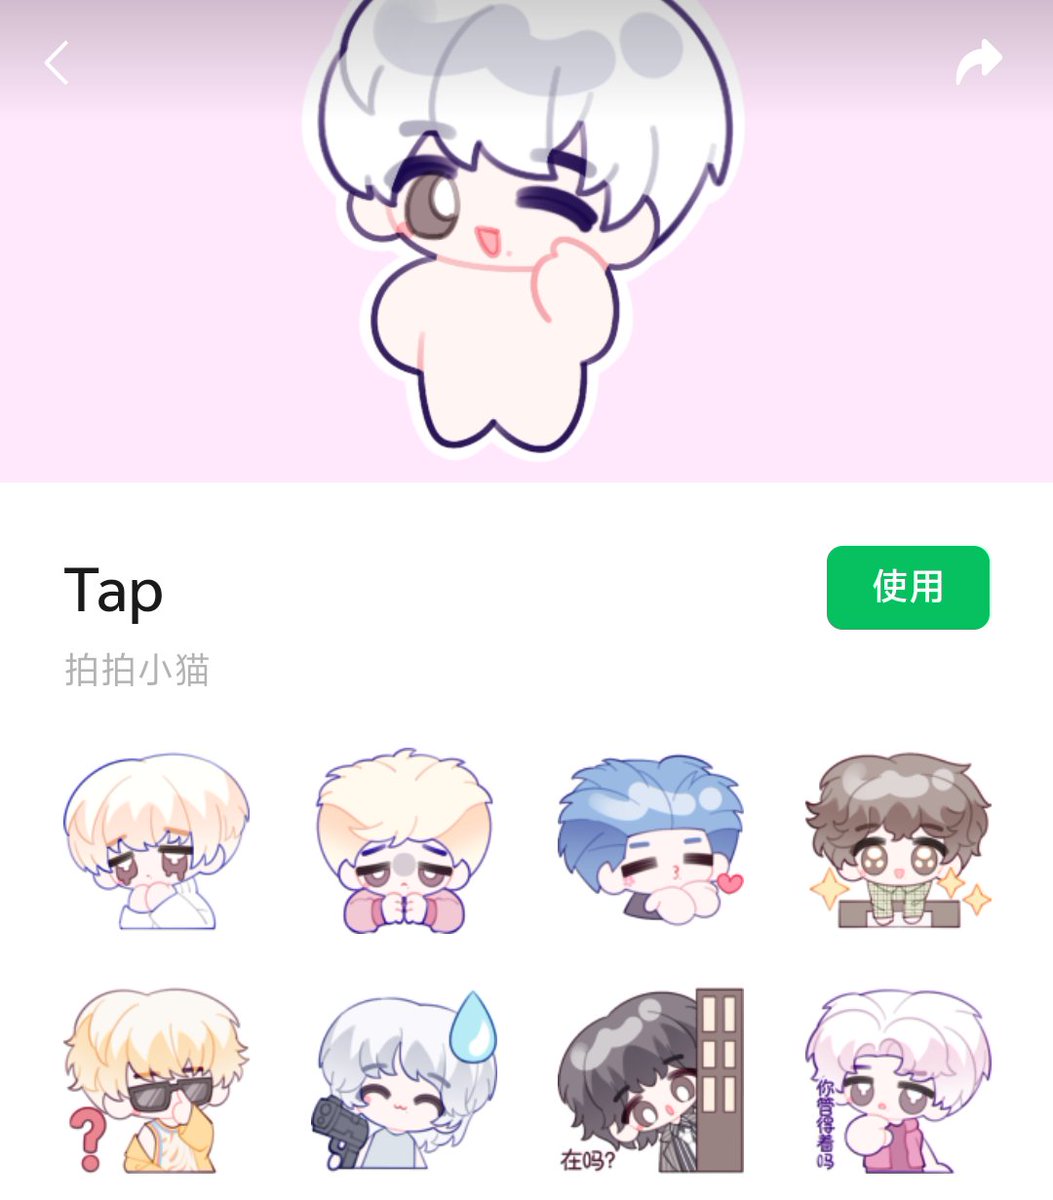 I drew some wechat memes of Tap TY…
#태용 #TAEYONG #fanart